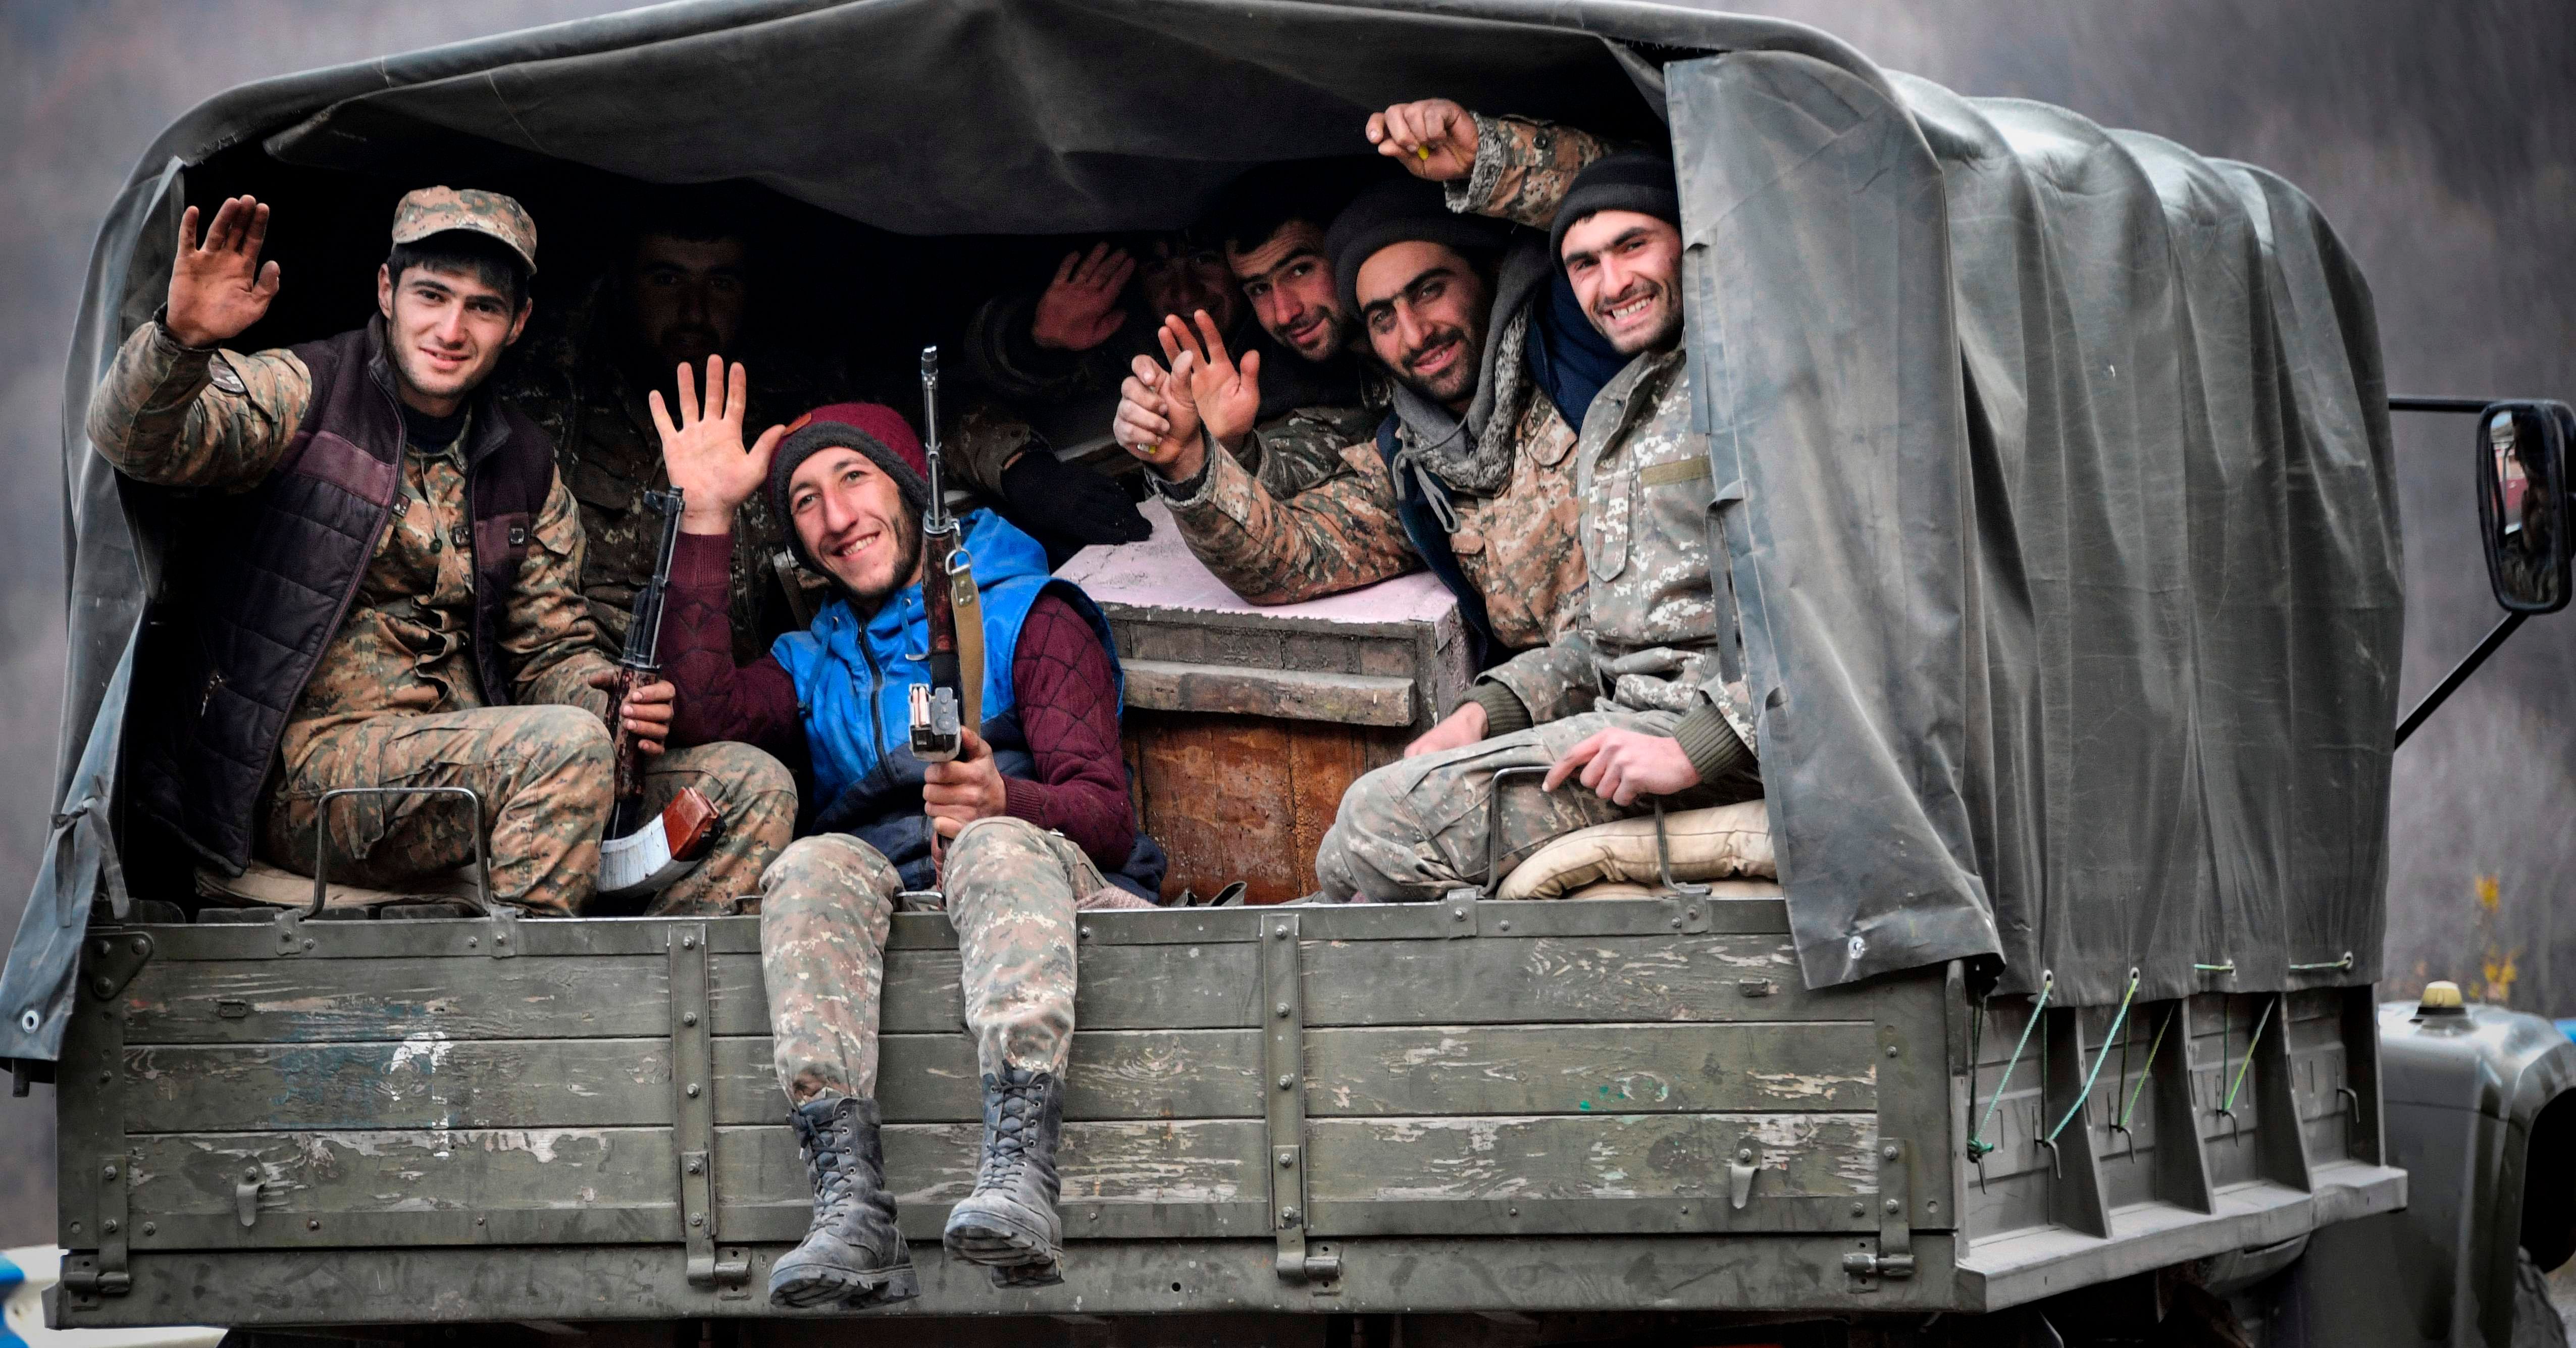 Armenian soldiers sit in the back of a truck as they drive along a road outside Kalbadjar on November 15, 2020. - Azerbaijan said on November 15, 2020, it had agreed to extend a deadline for Armenia to withdraw from a disputed district as part of a peace accord that ended six weeks of fierce fighting over the Nagorno-Karabakh region. Armenia lost around 2300 dead during the military conflict over this breakaway region.Credit: AFP Photo